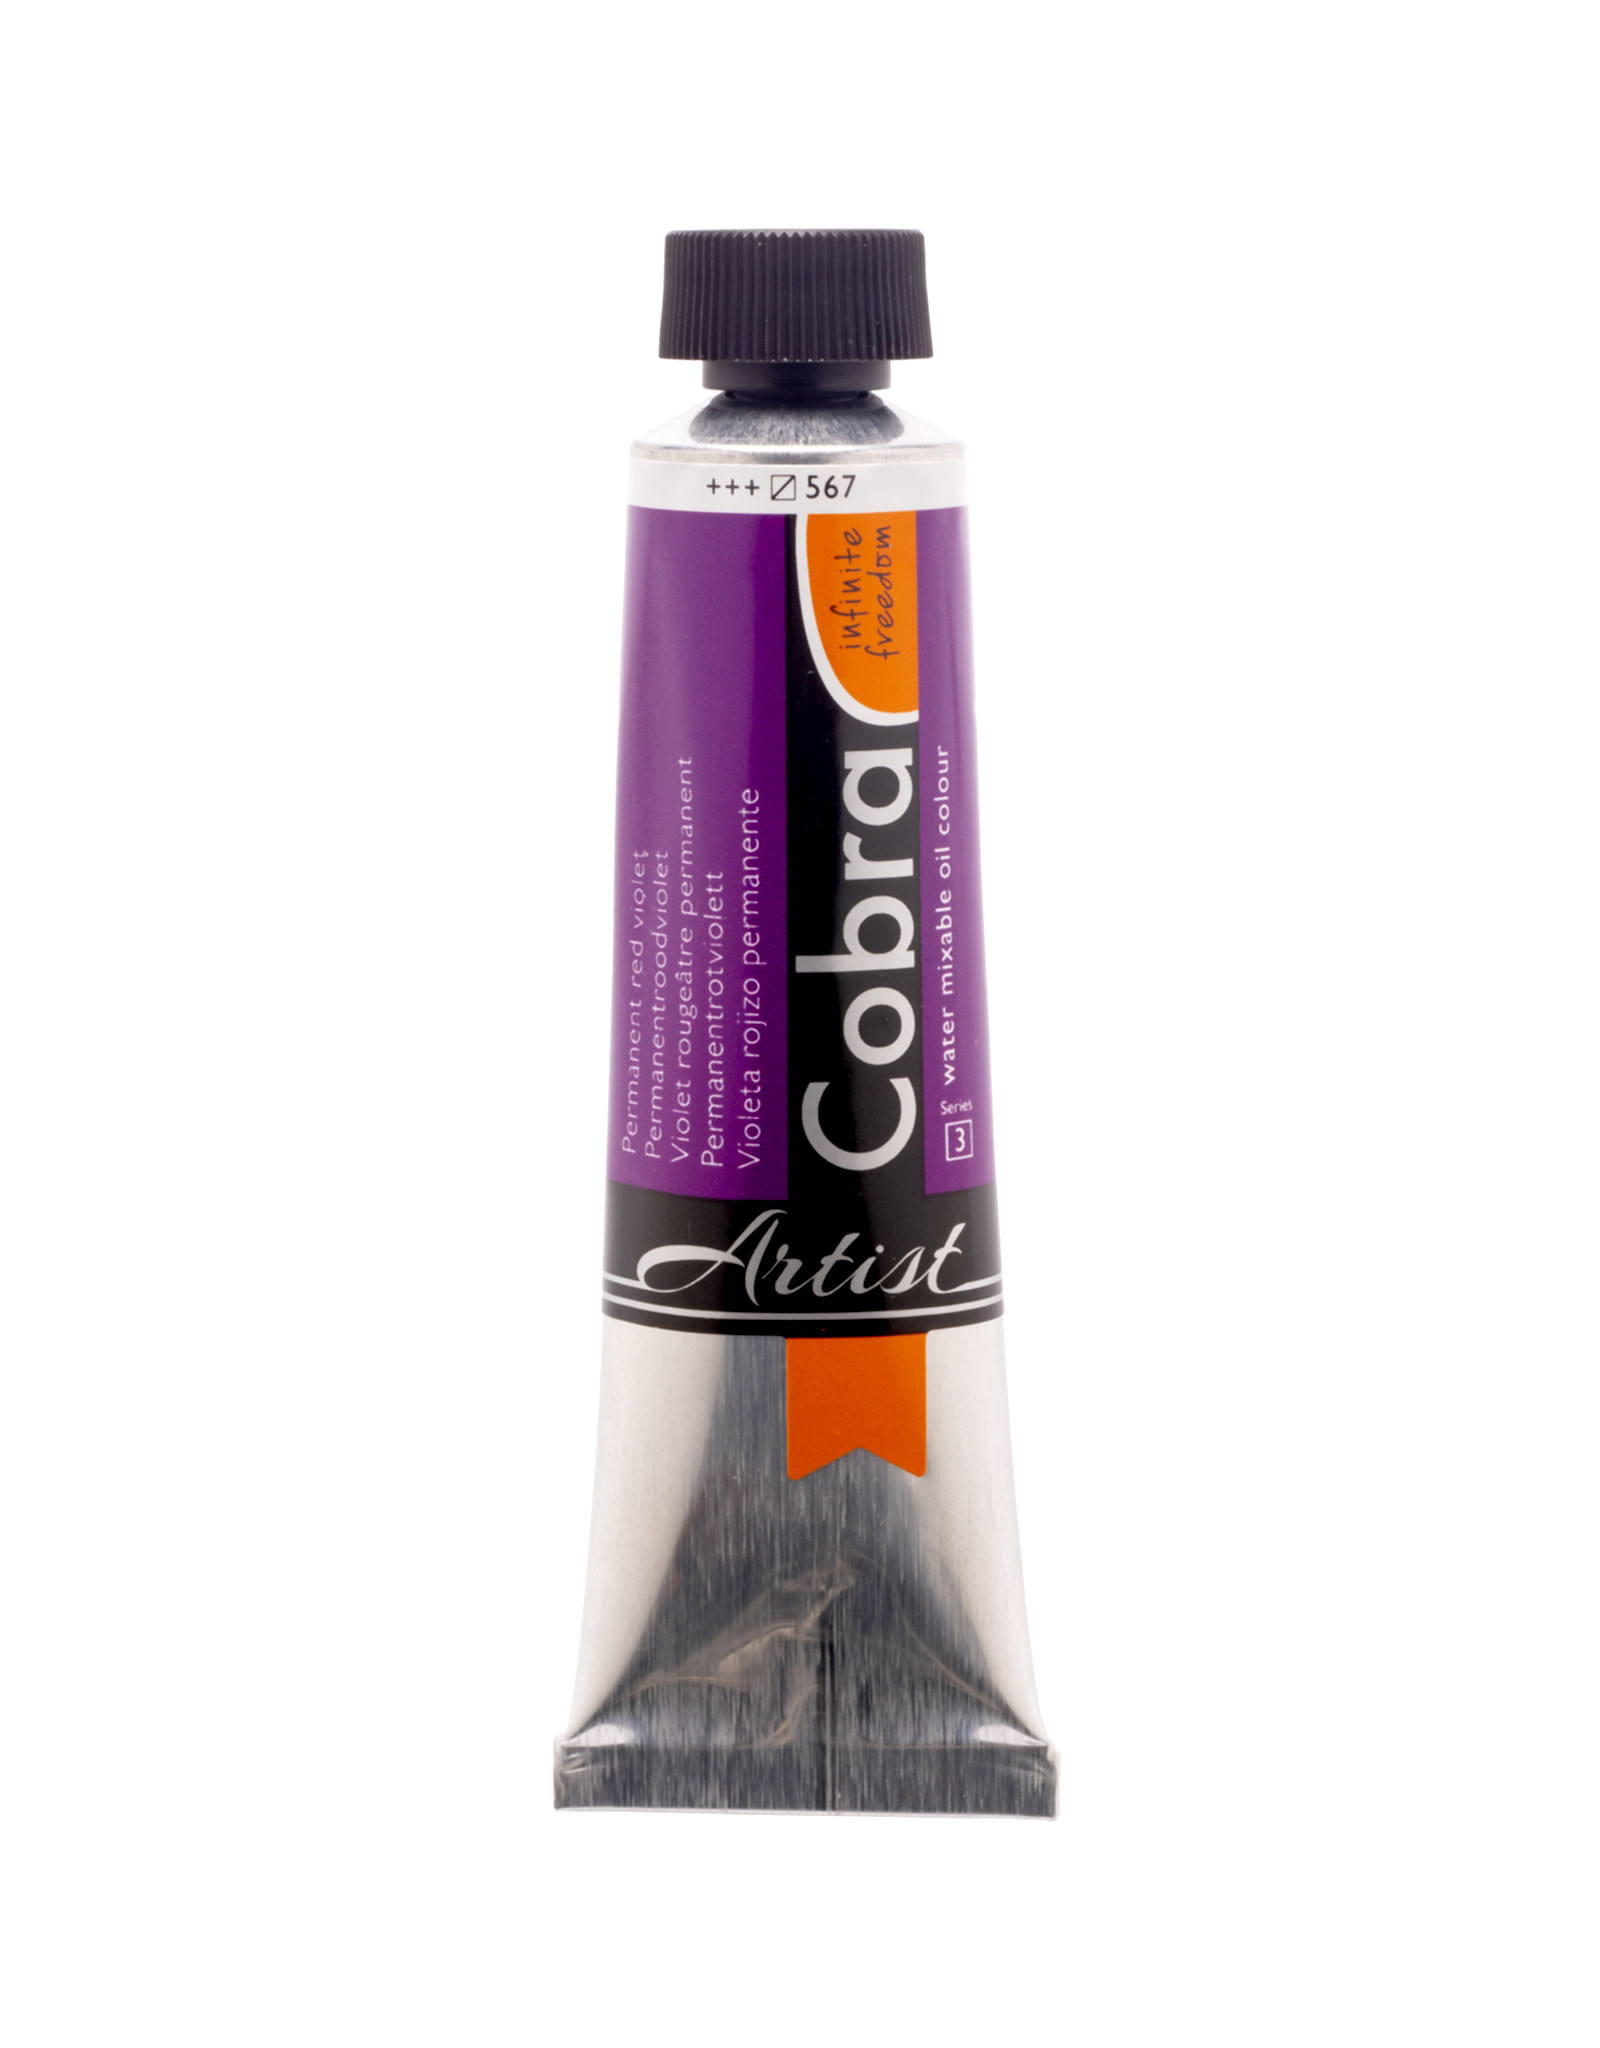 Royal Talens Cobra Water Mixable Artist Oils, Permanent Red Violet 40ml